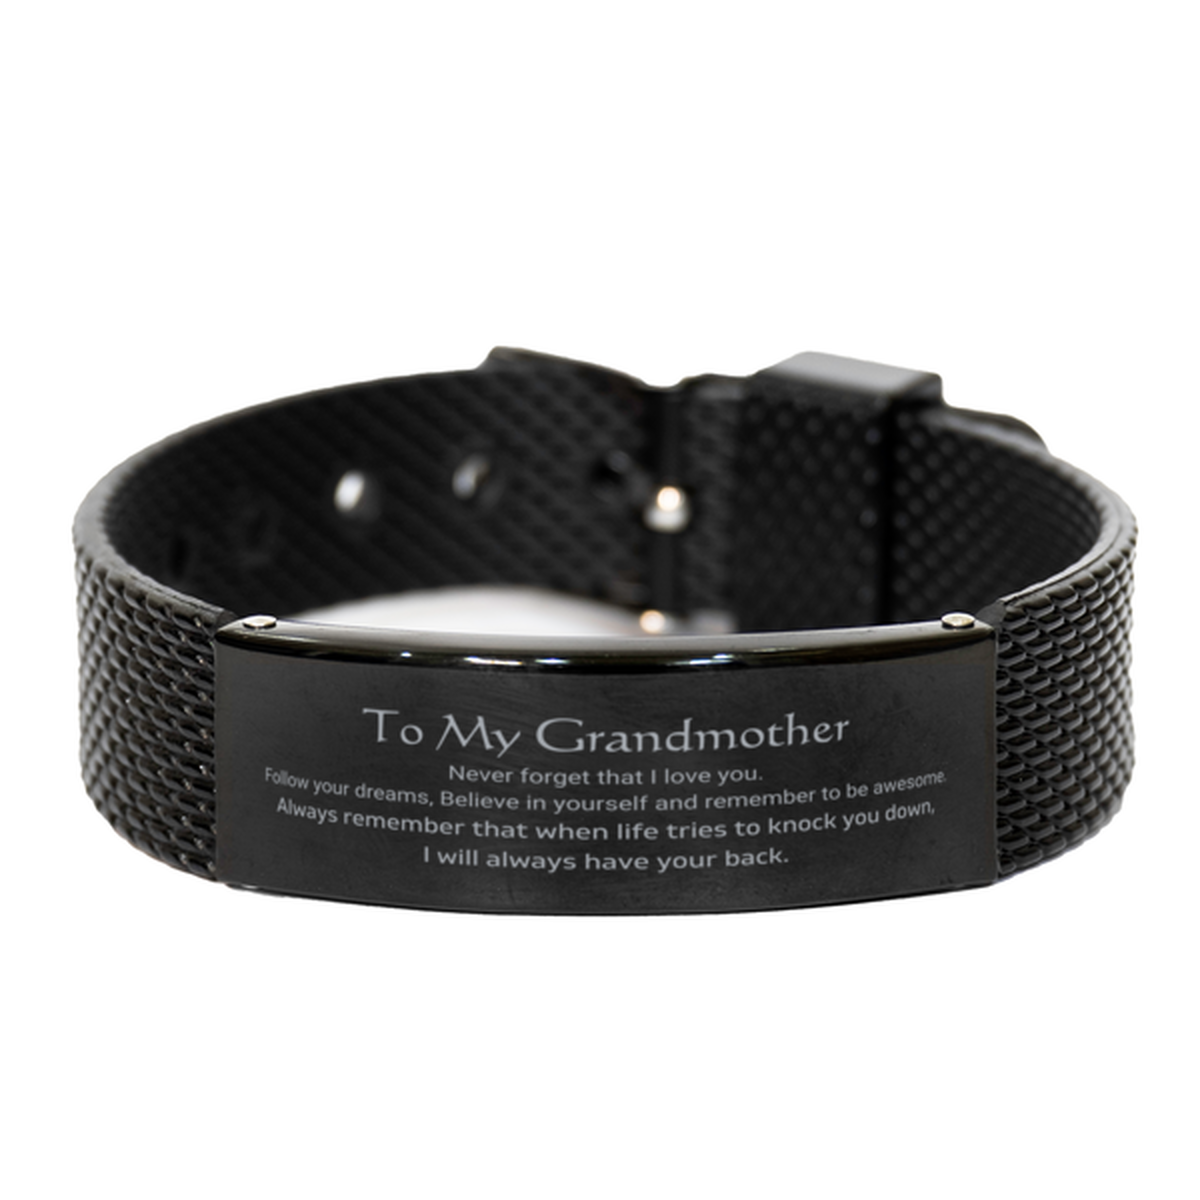 Inspirational Gifts for Grandmother, Follow your dreams, Believe in yourself, Grandmother Black Shark Mesh Bracelet, Birthday Christmas Unique Gifts For Grandmother